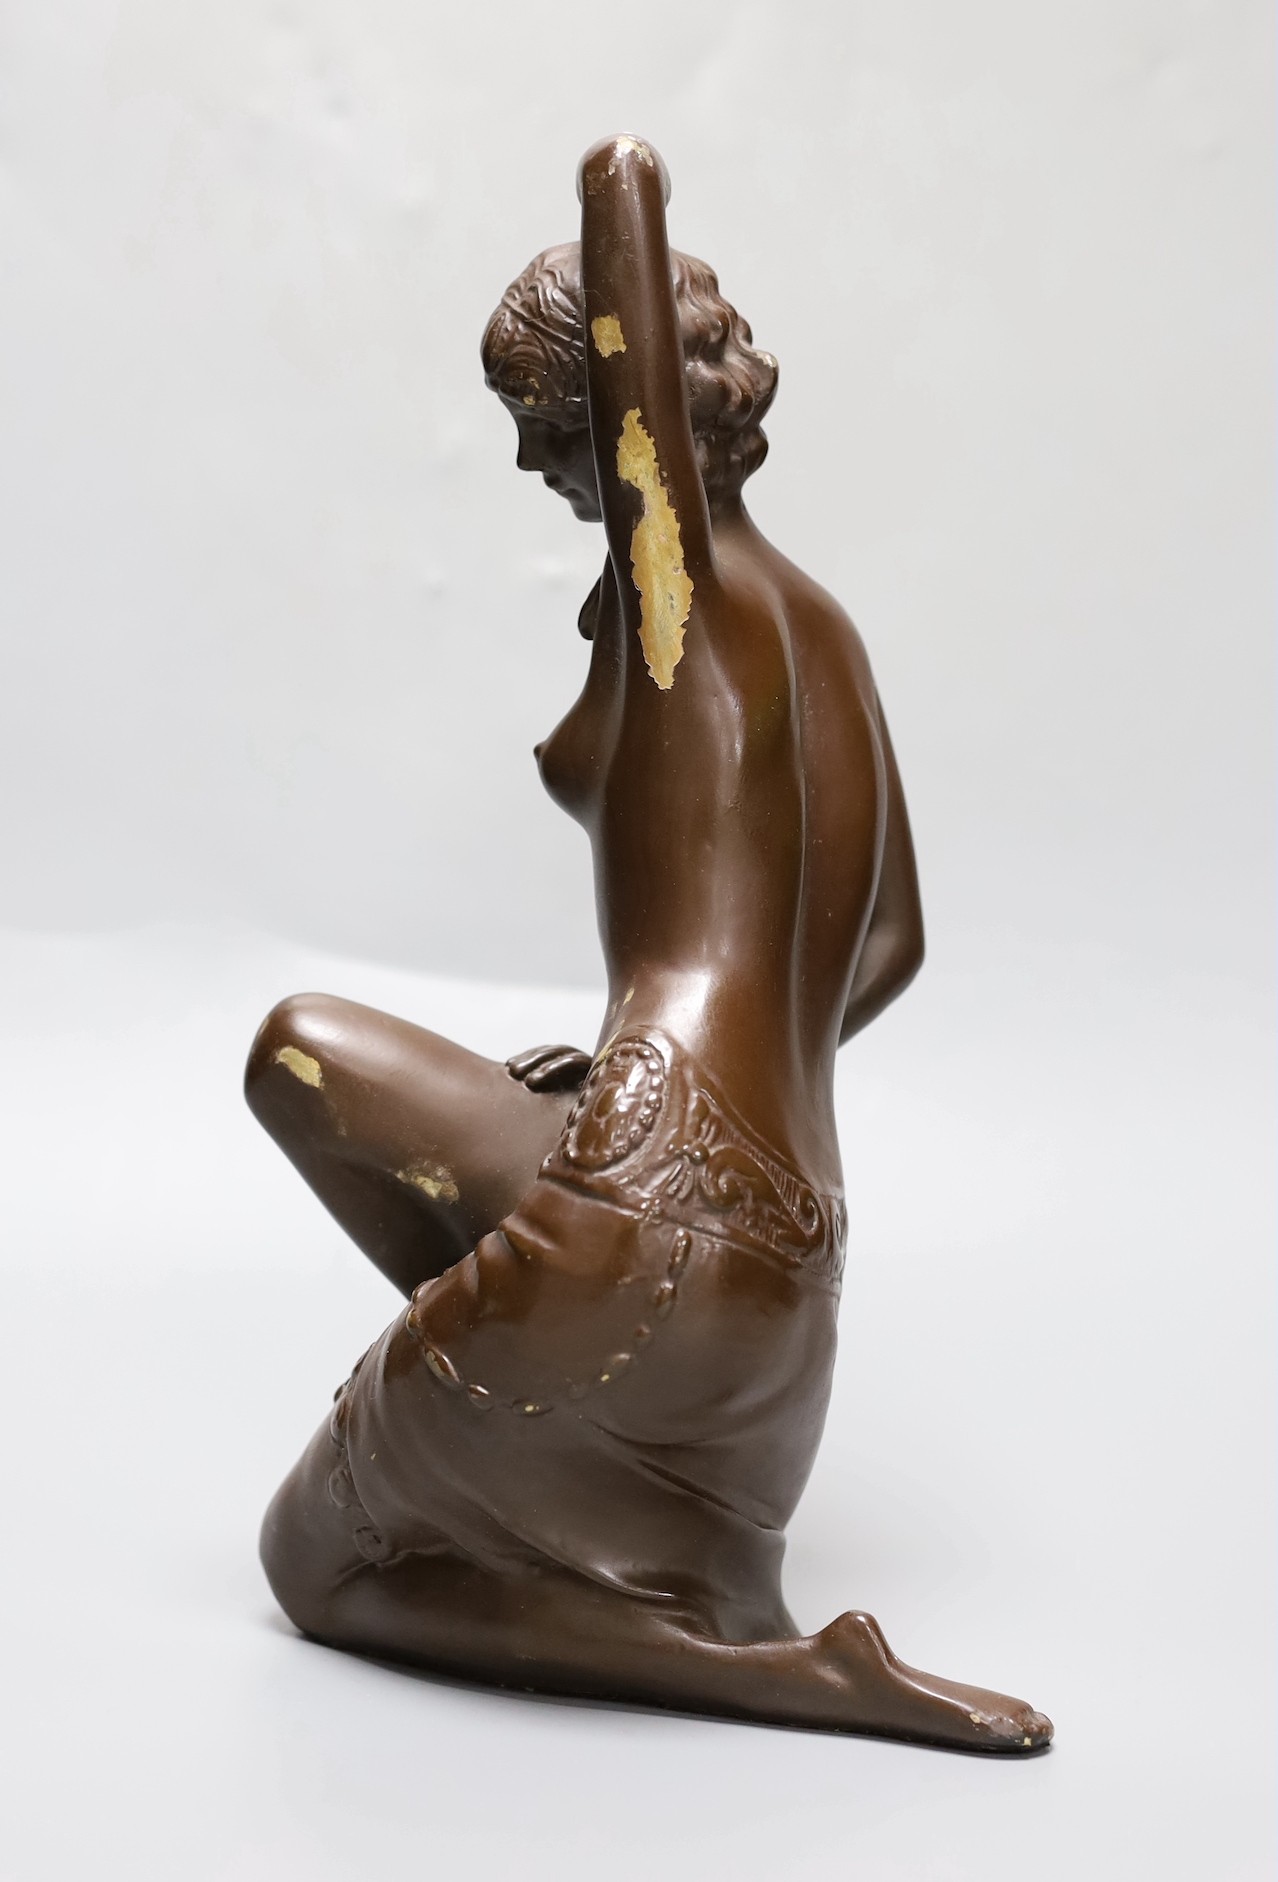 A brown lacquered bronze figure of a lady 30cm